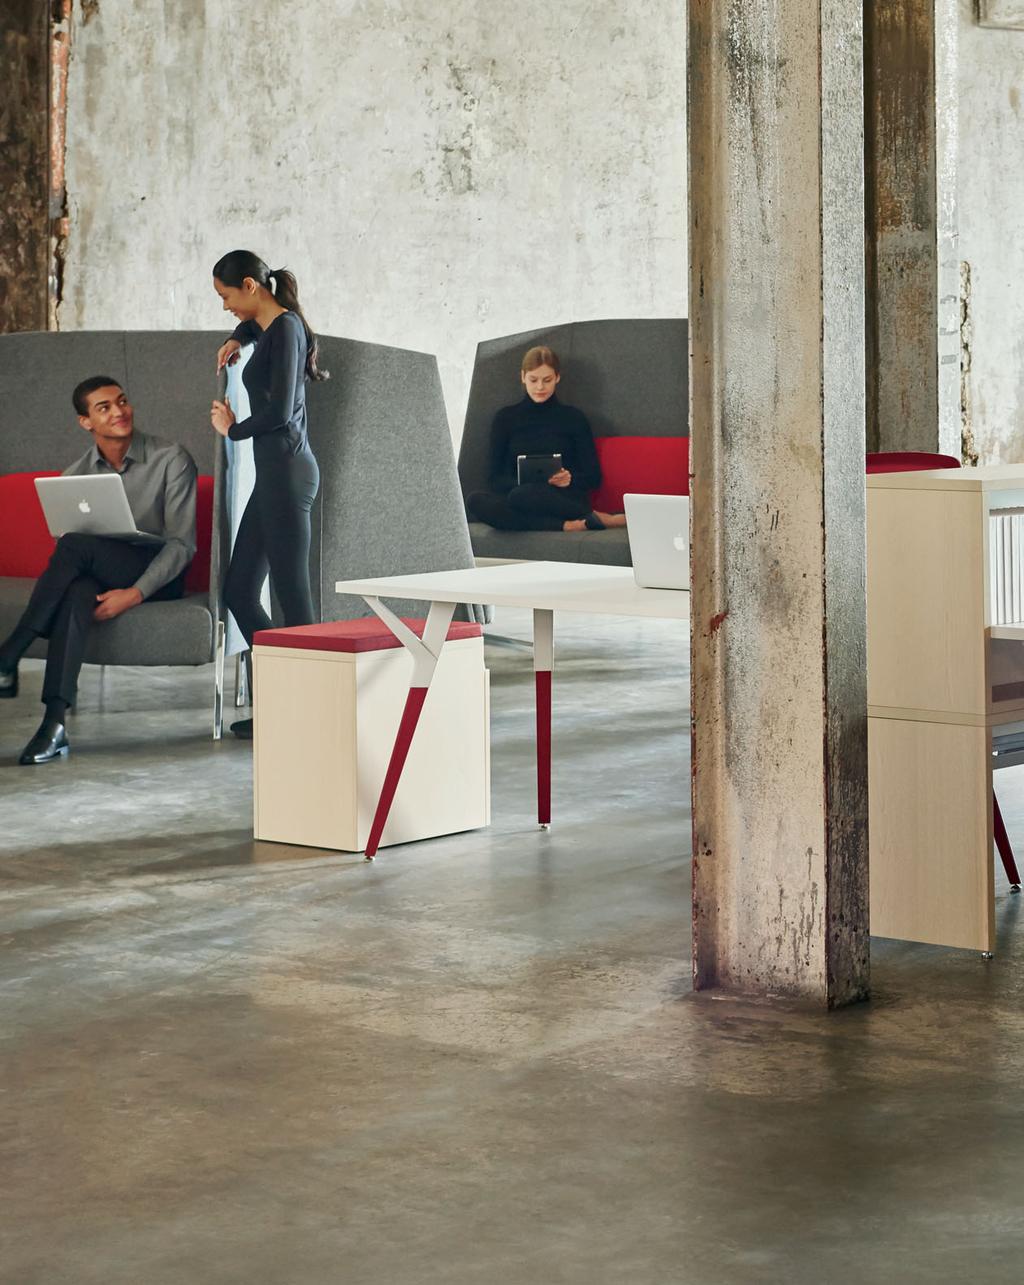 16 Comprising an array of versatile furniture pieces, upstage provides the ability to tailor the layout of workspaces.